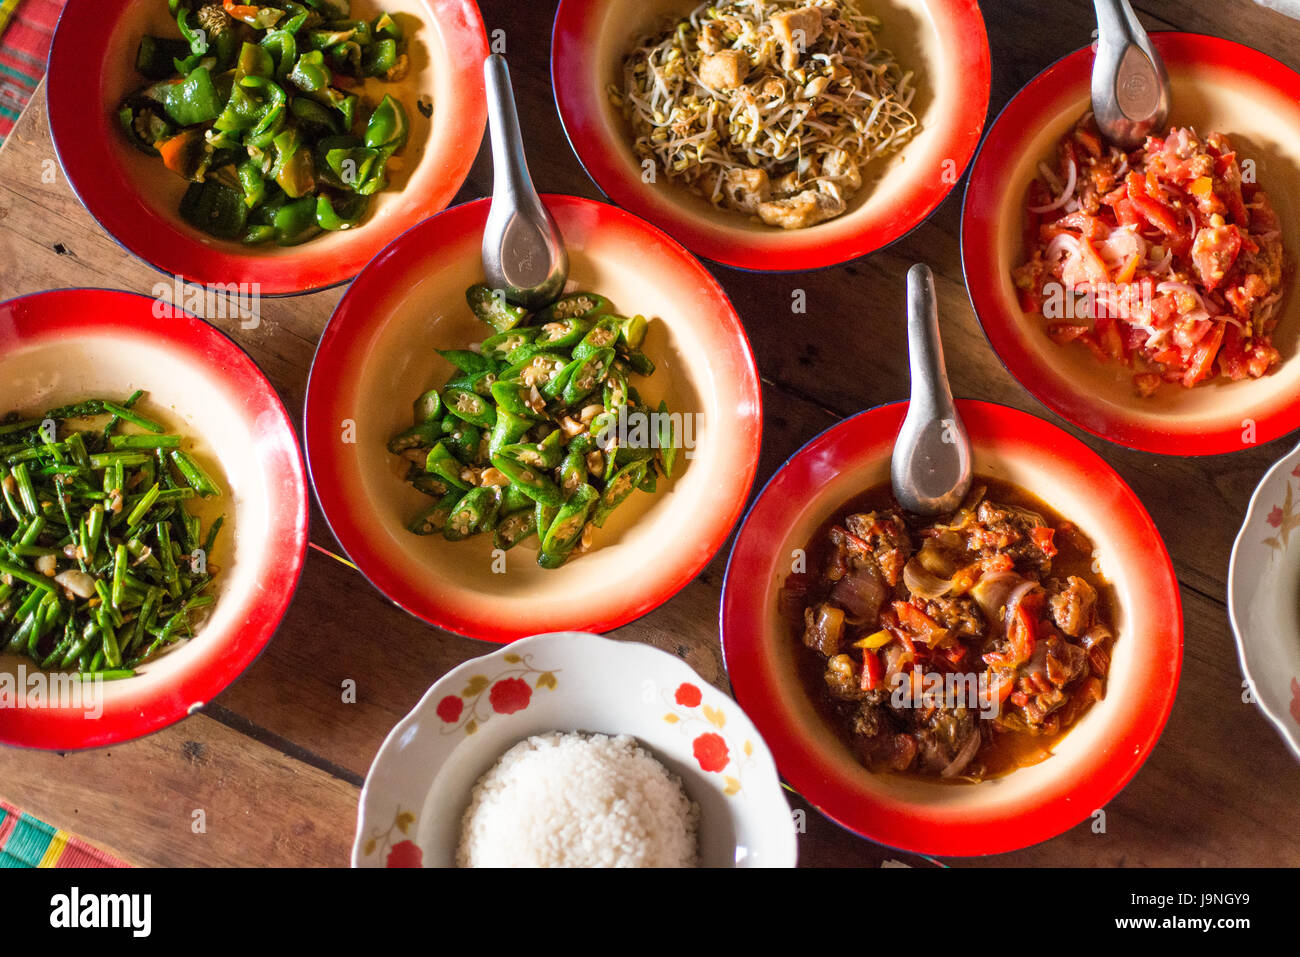 Bowls of food in small village in Myanmar Stock Photo